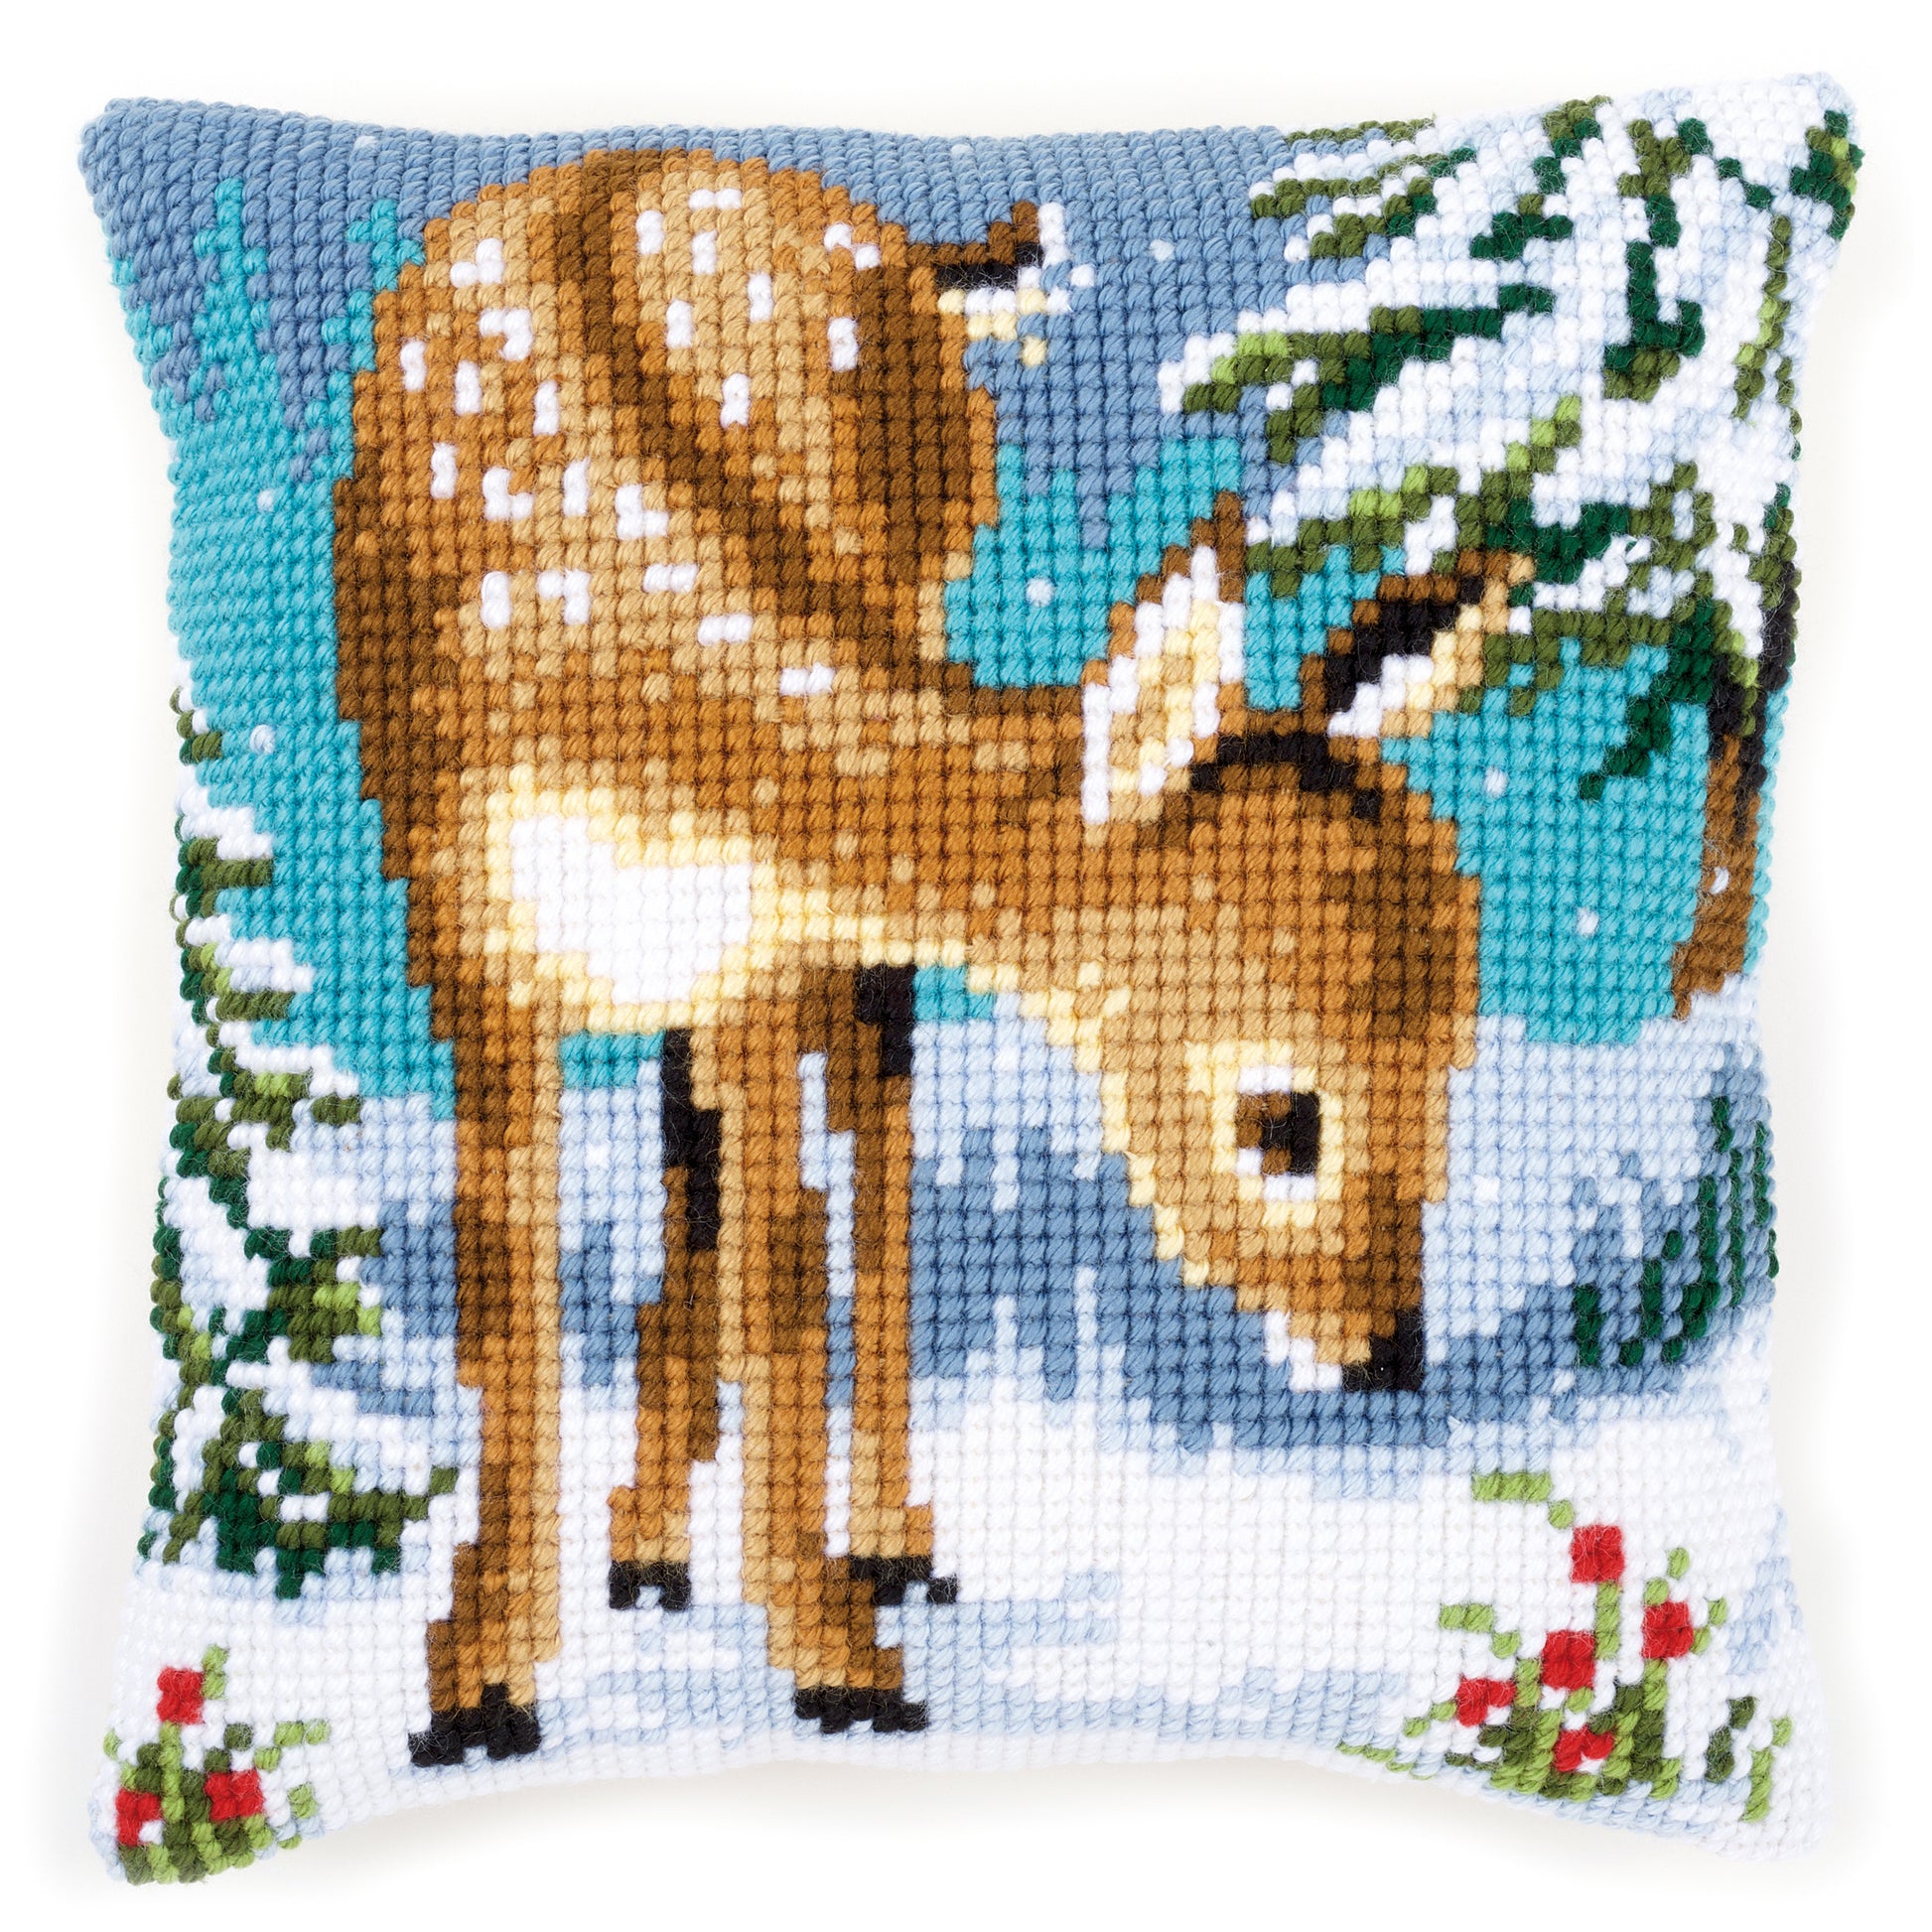 Little Deer Printed Cross Stitch Cushion Kit by Vervaco